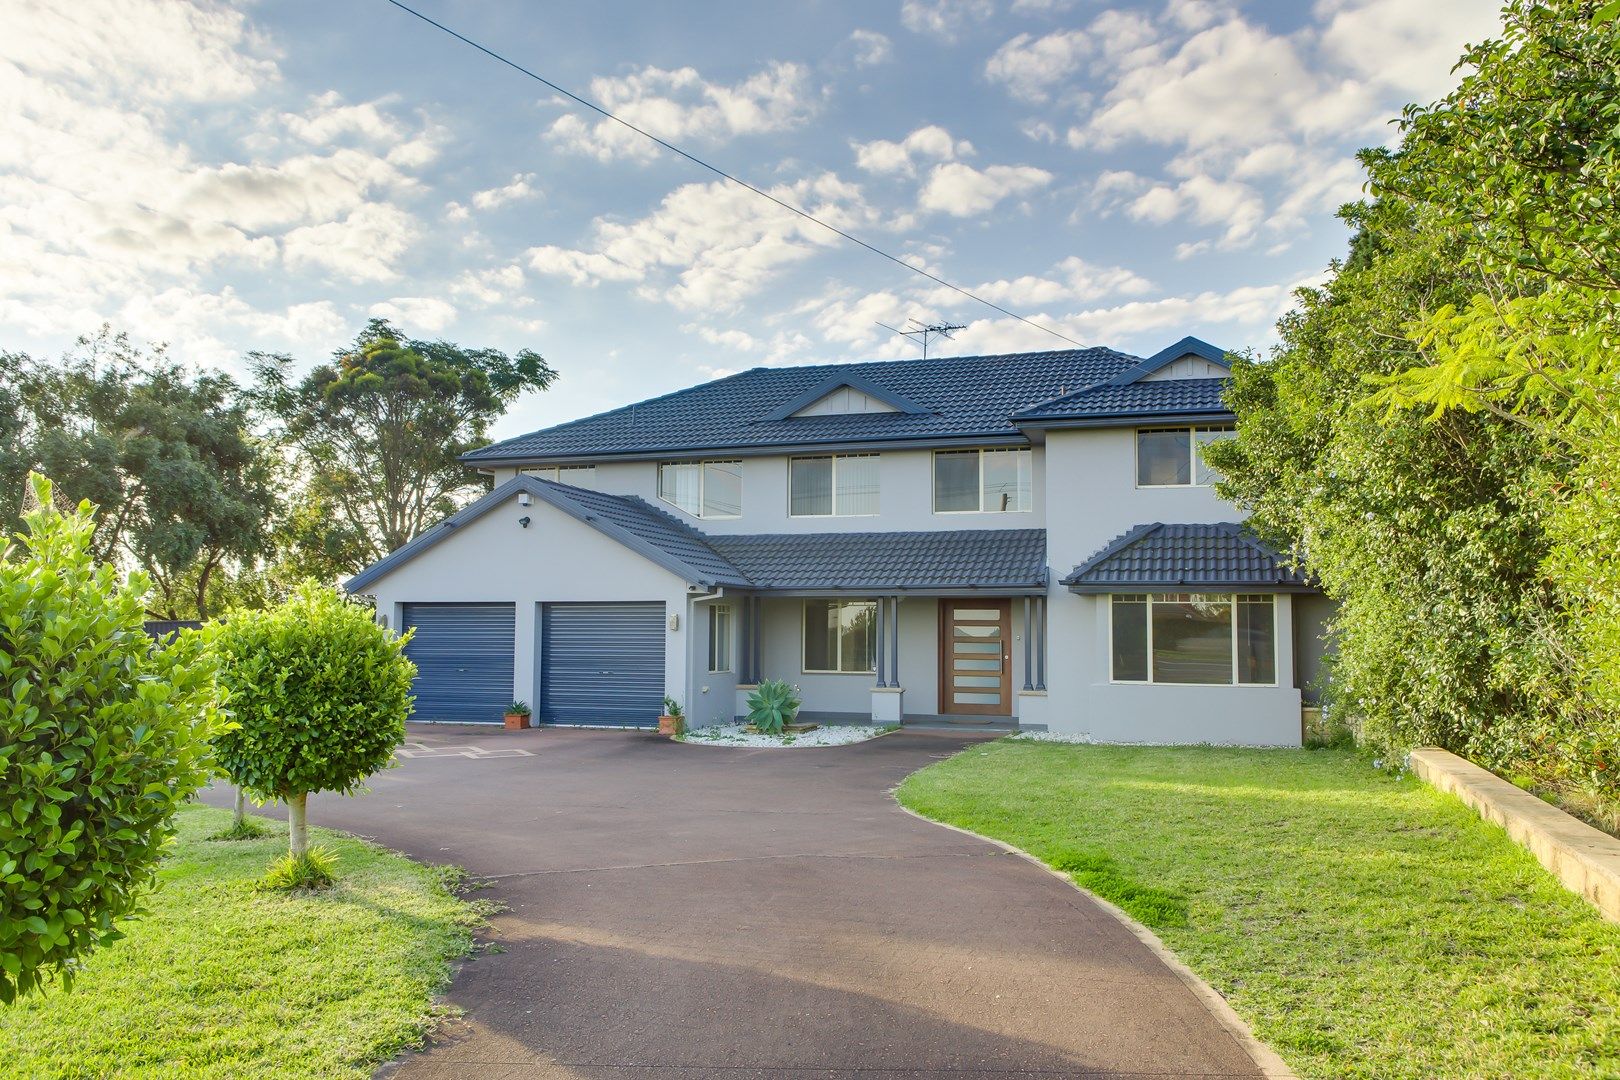 5 bedrooms House in 101A Glenhaven Road GLENHAVEN NSW, 2156